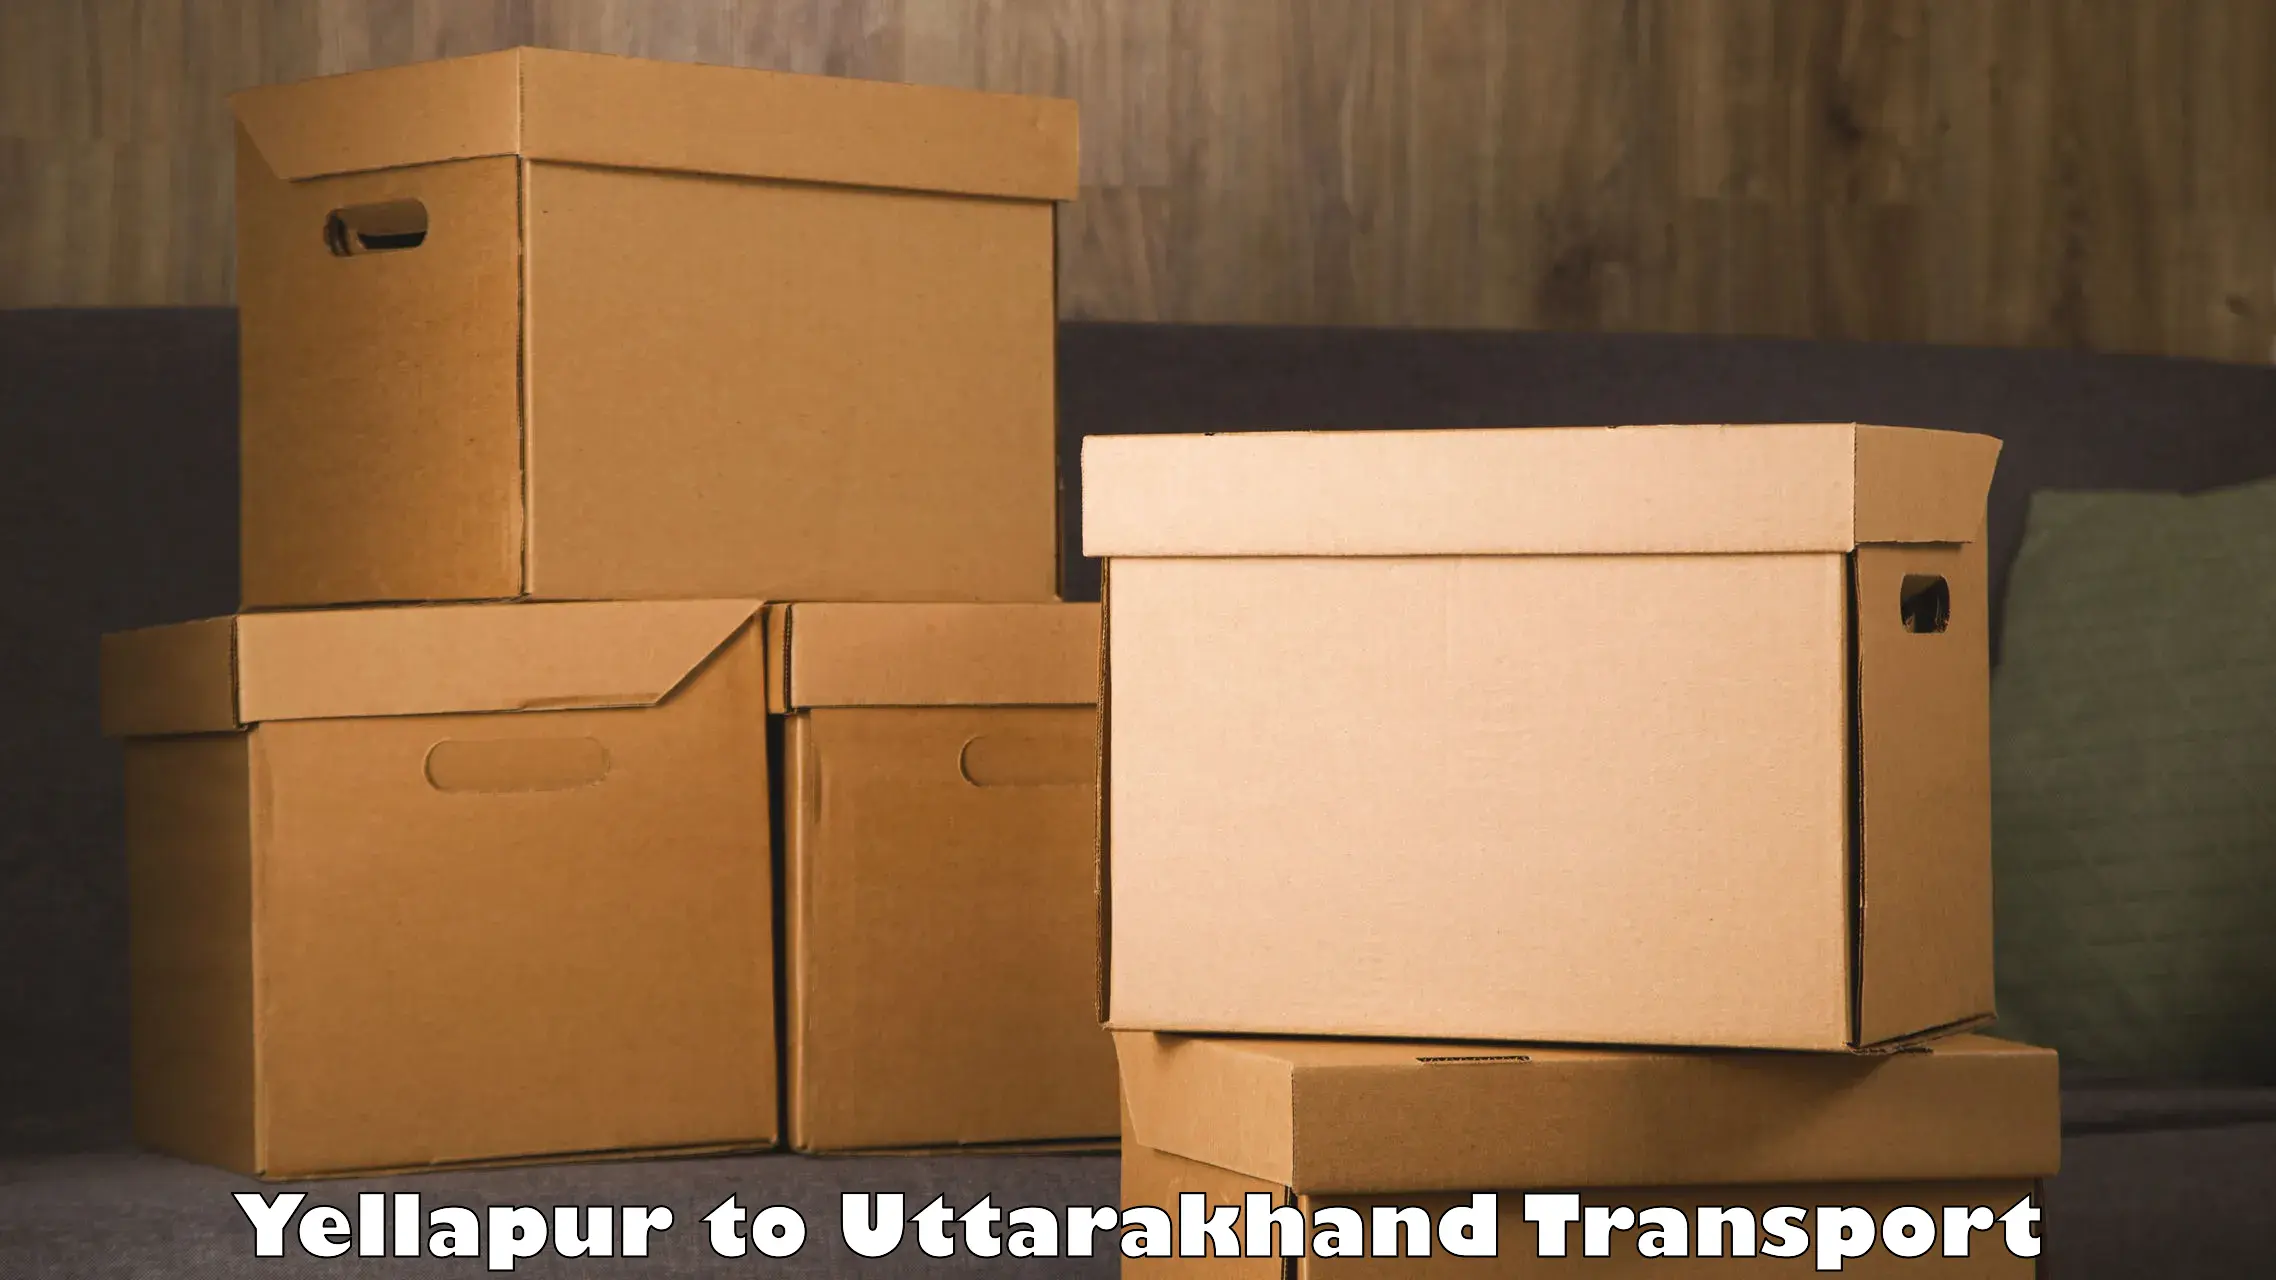 Goods delivery service Yellapur to Rishikesh